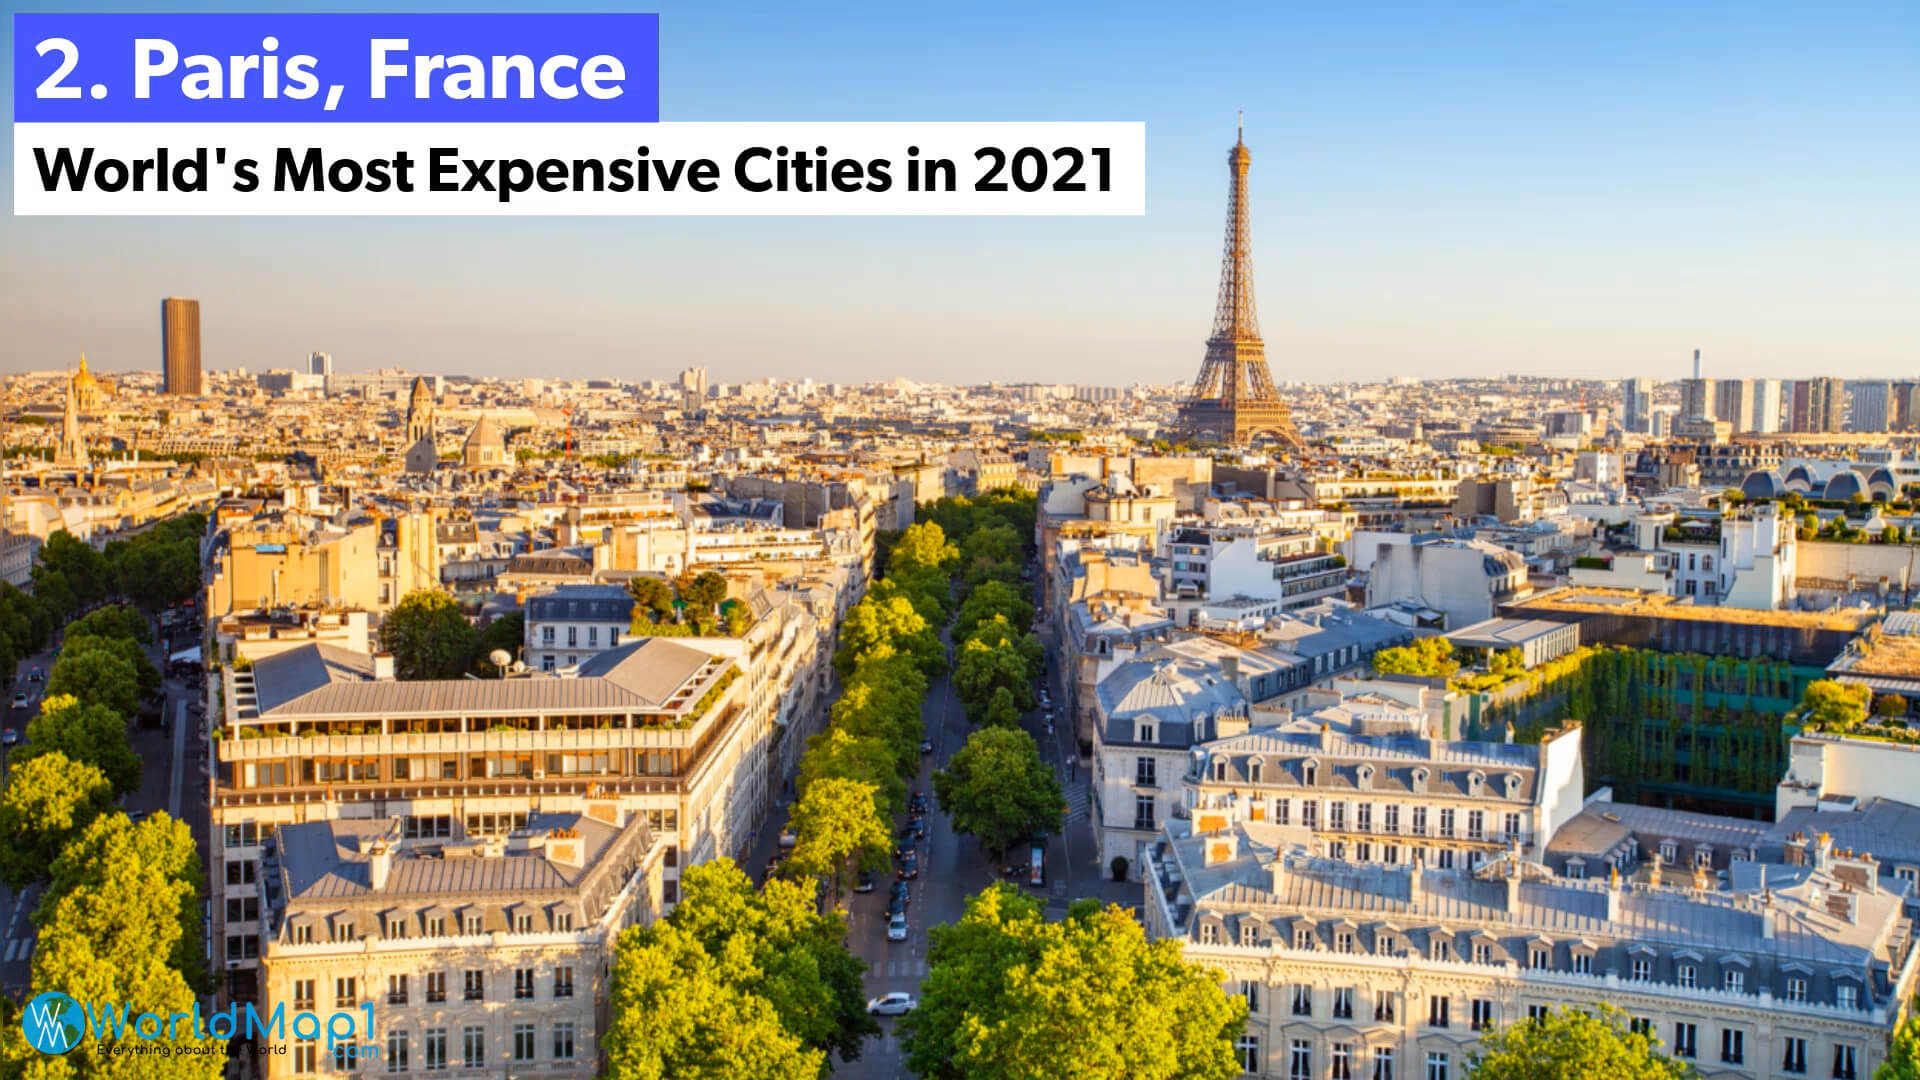 World's Most Expensive Cities - Paris, France